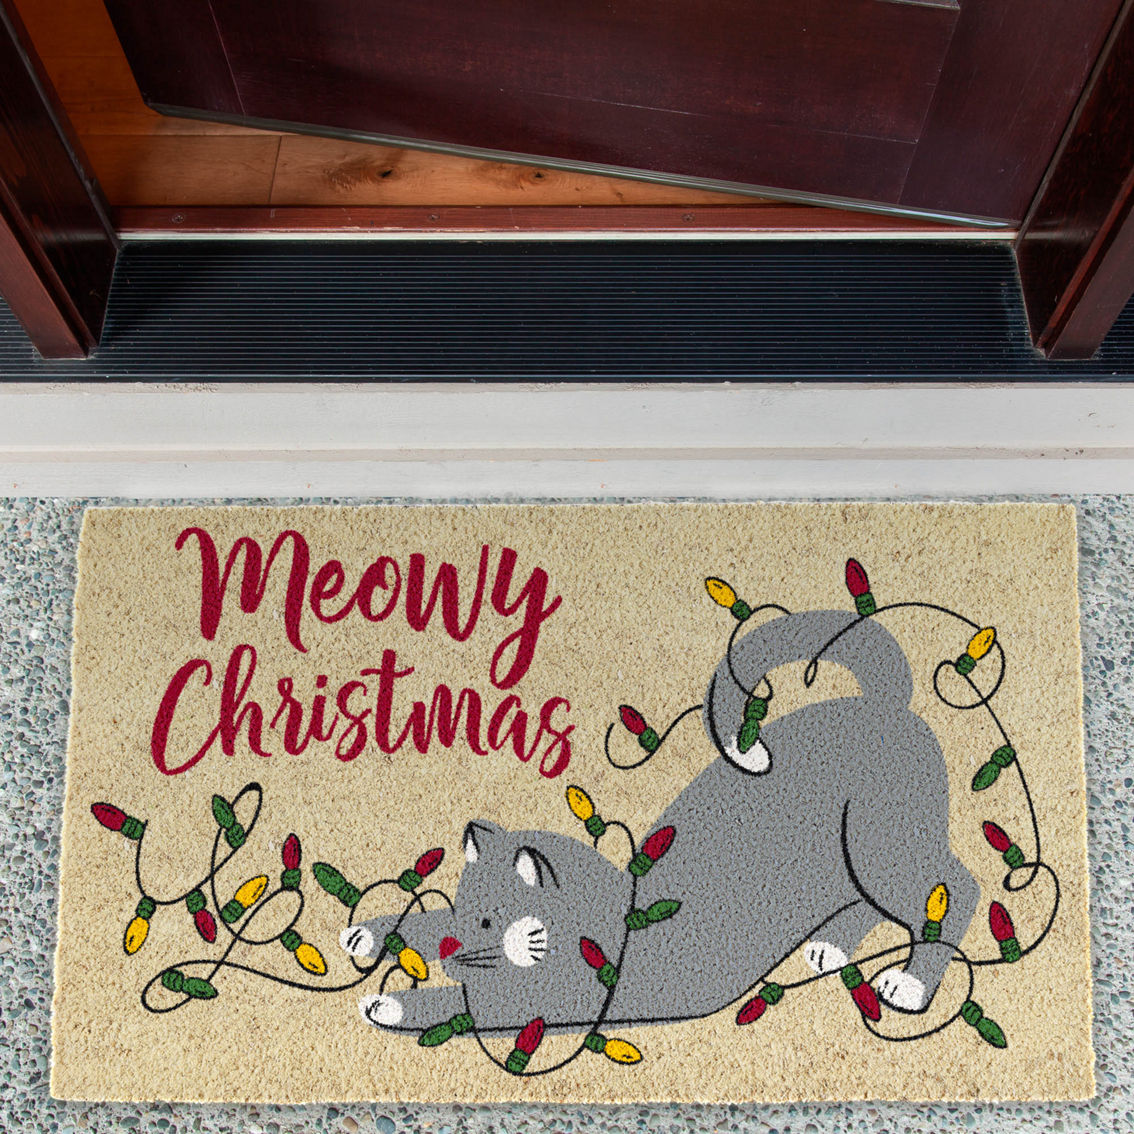 Design Imports Meowy Christmas Doormat - Image 2 of 6